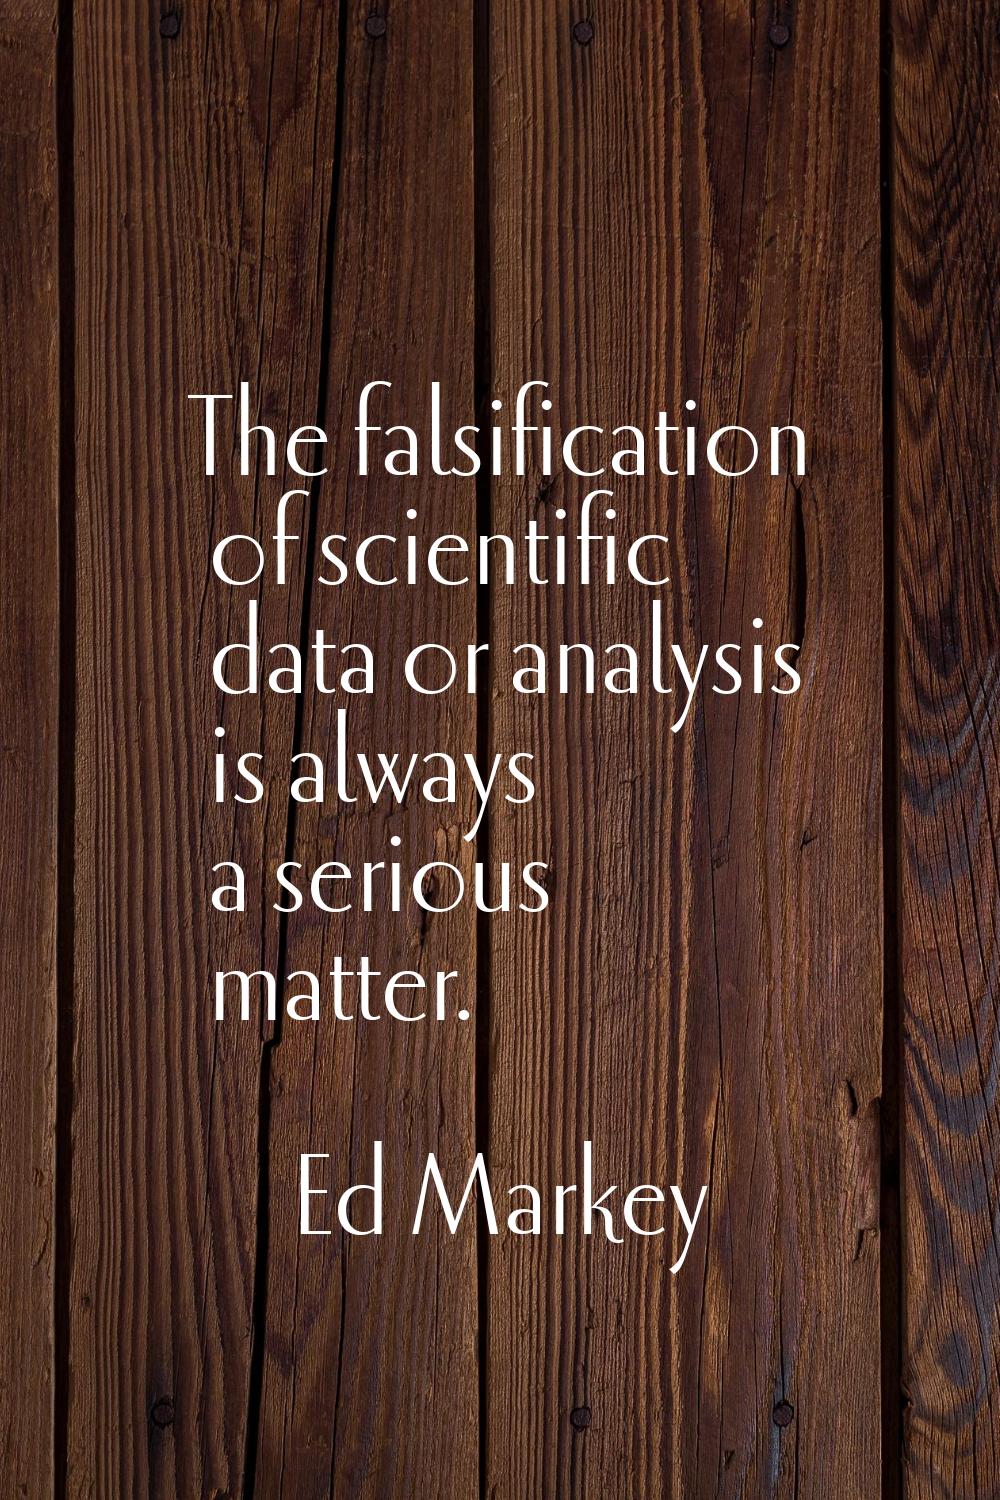 The falsification of scientific data or analysis is always a serious matter.